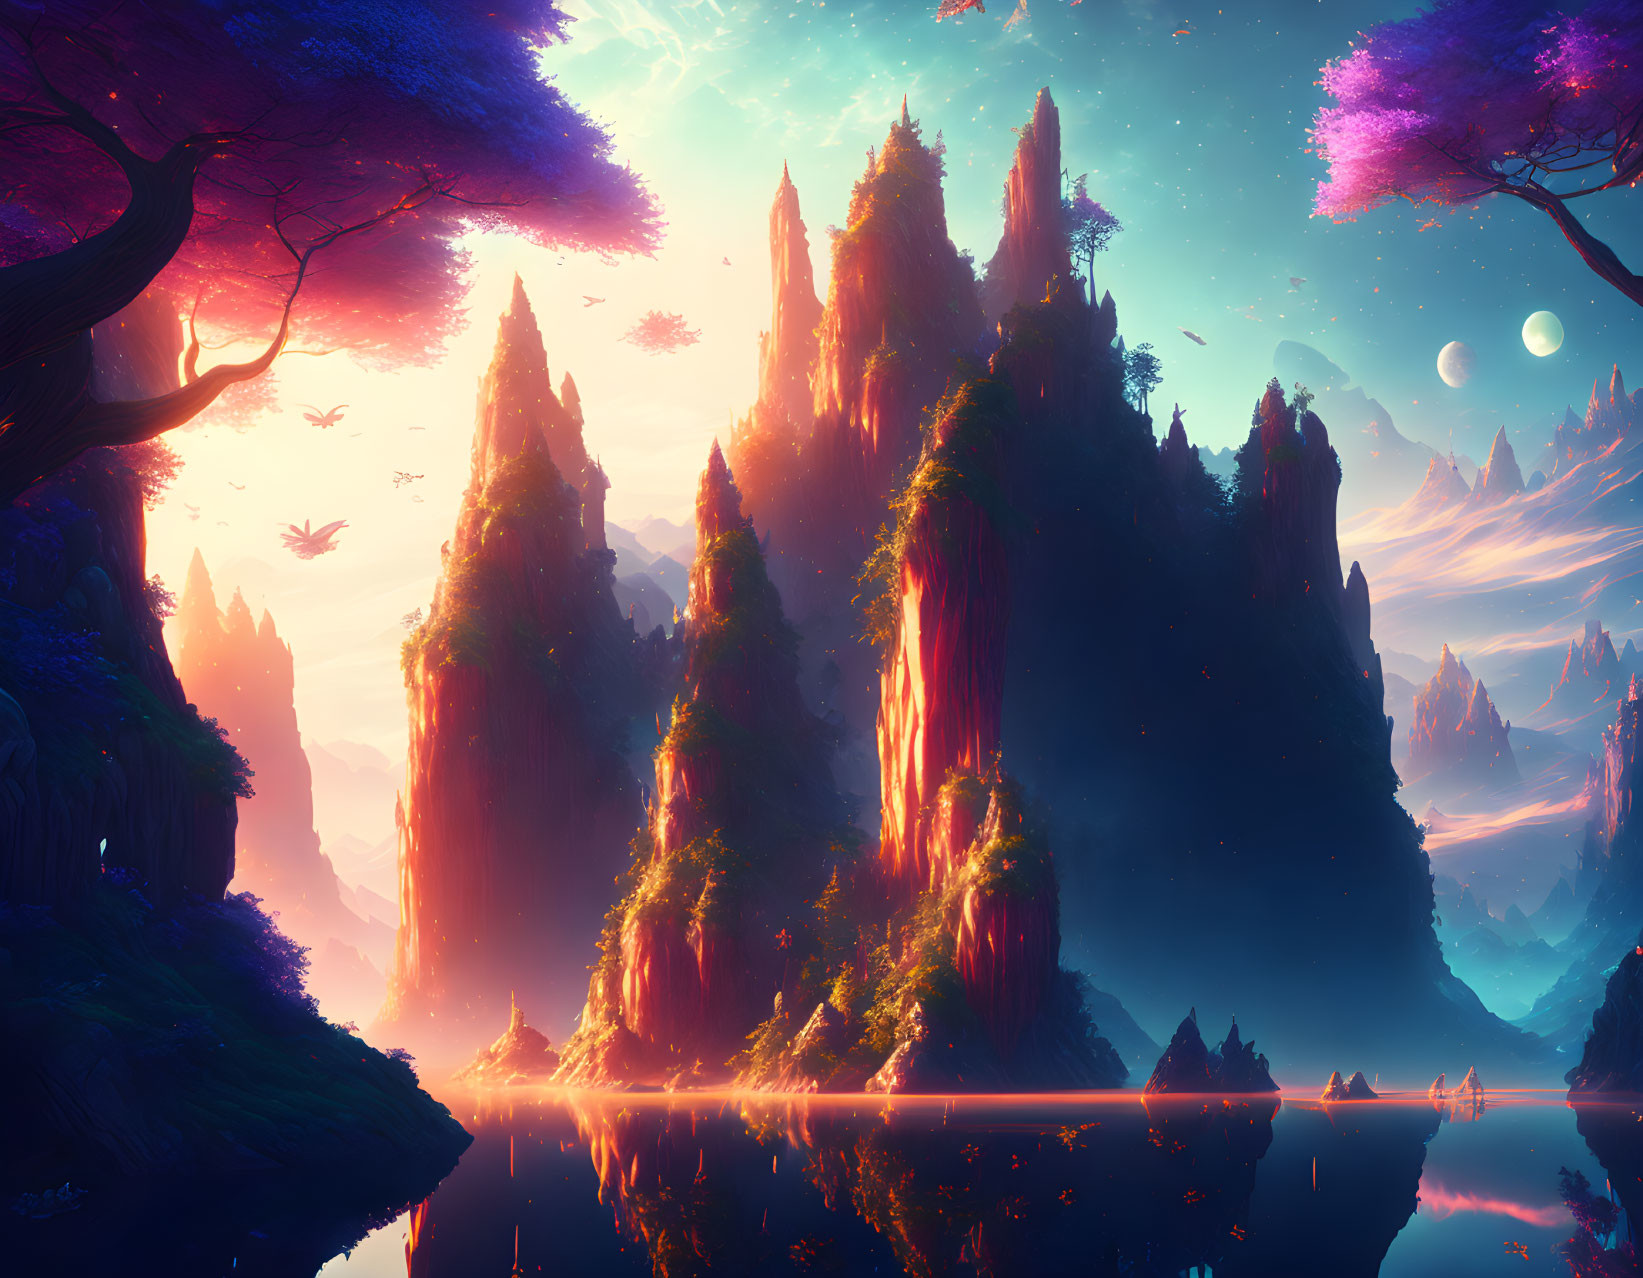 Fantasy landscape with towering rock formations in purple forest under starry sky